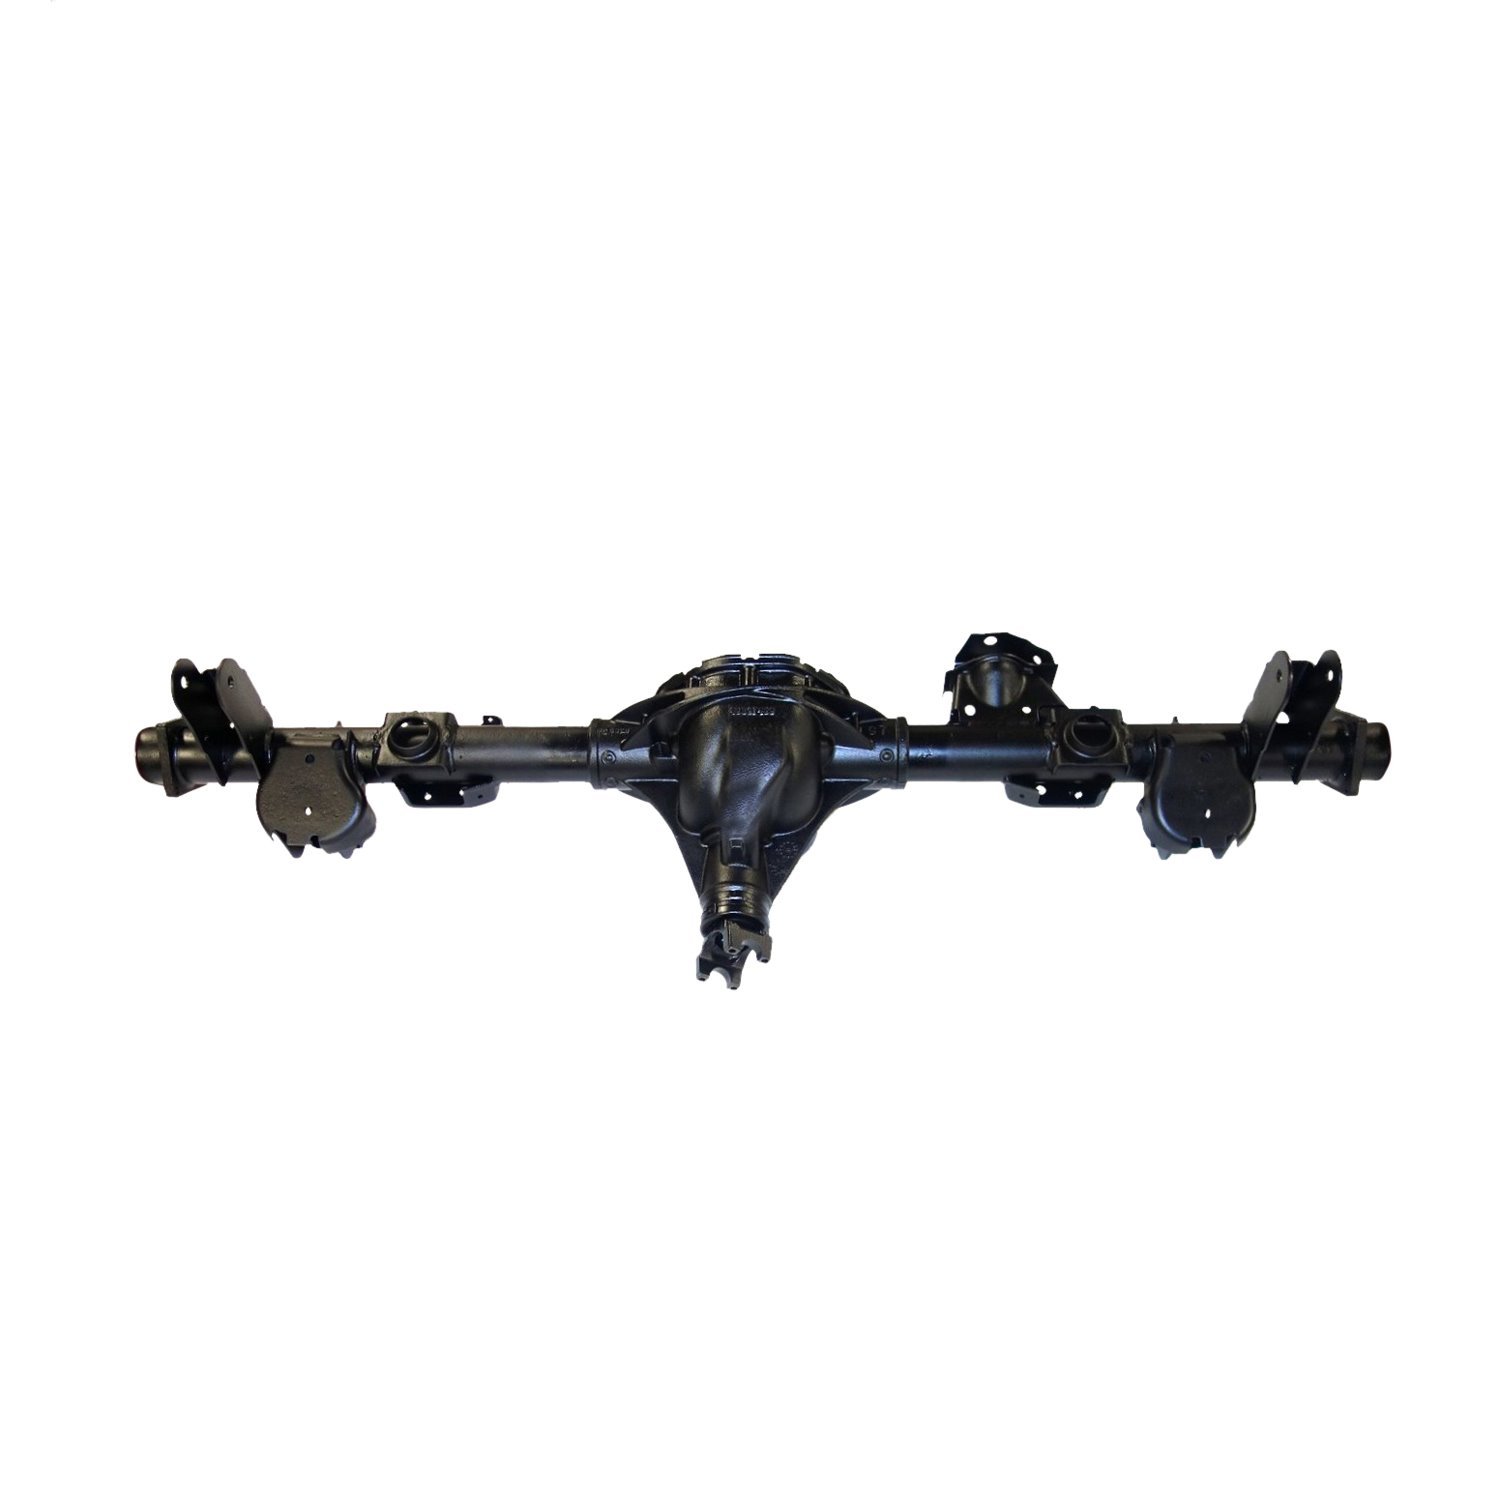 Remanufactured Axle Assembly for GM 8.6" 2007-08 GM Suburban 1500, 3.23 Rato, Open